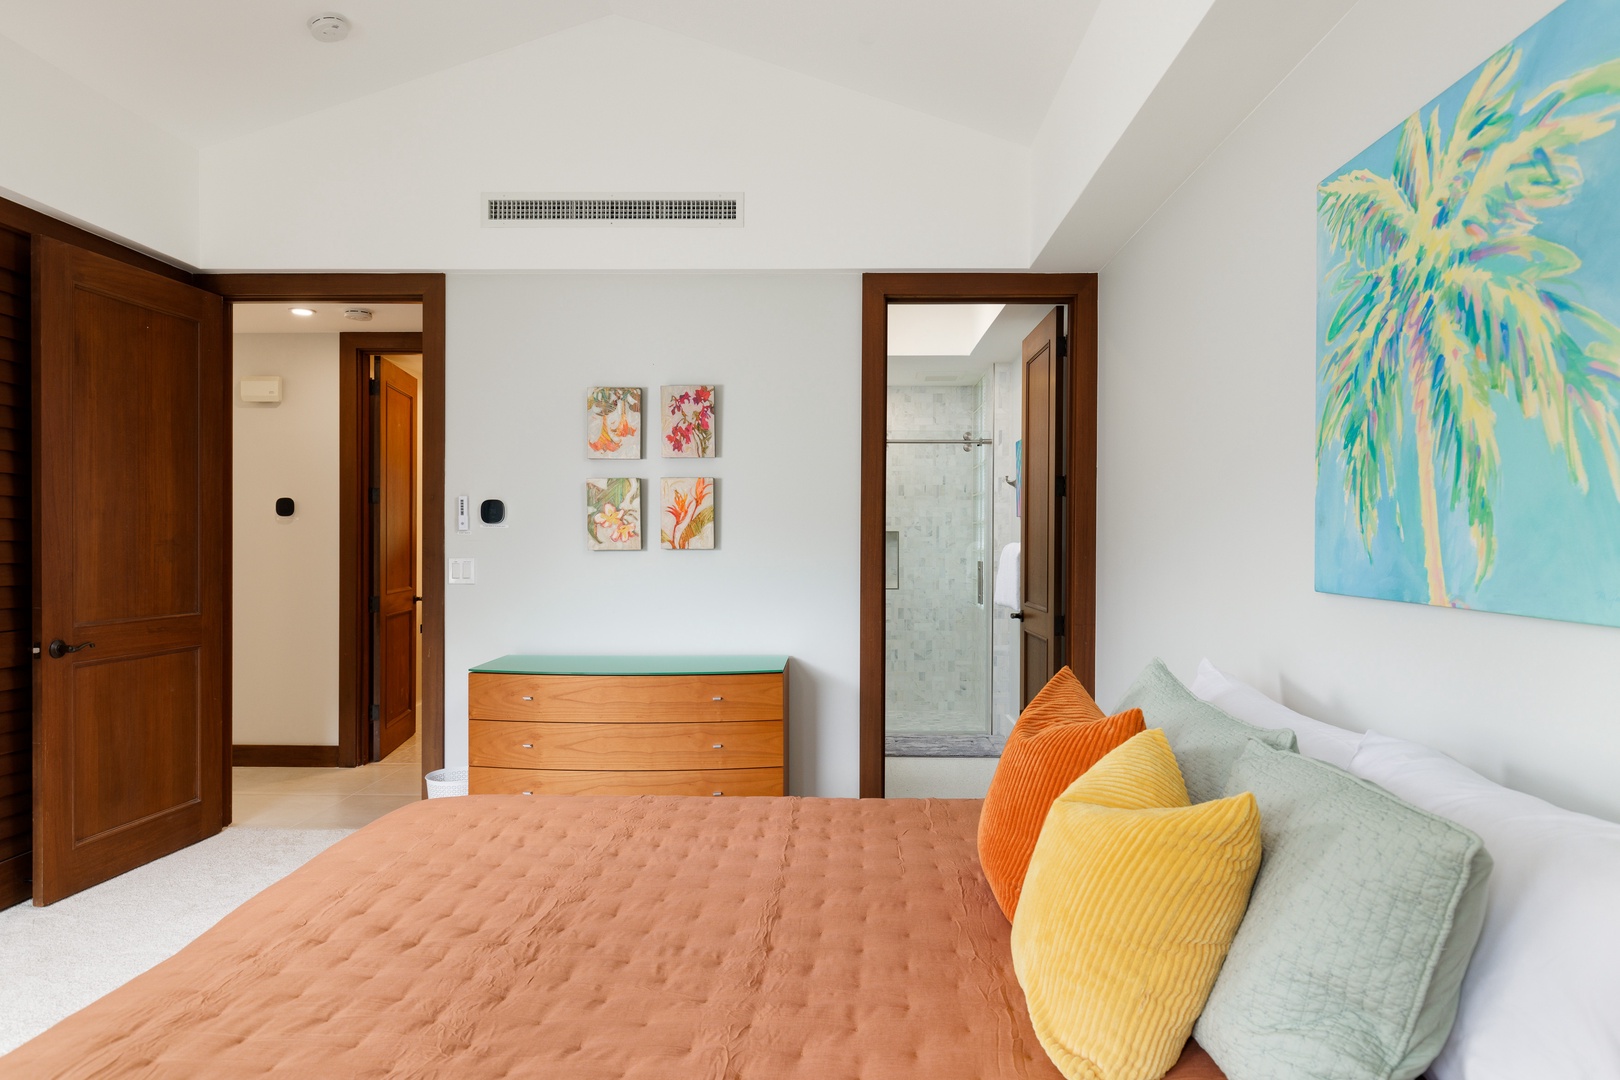 Kailua Kona Vacation Rentals, 3BD Fairways Villa (104A) at Four Seasons Resort at Hualalai - Outmost comfort for your private retreat, a room perfect for the little ones, with a cozy and plush beds.